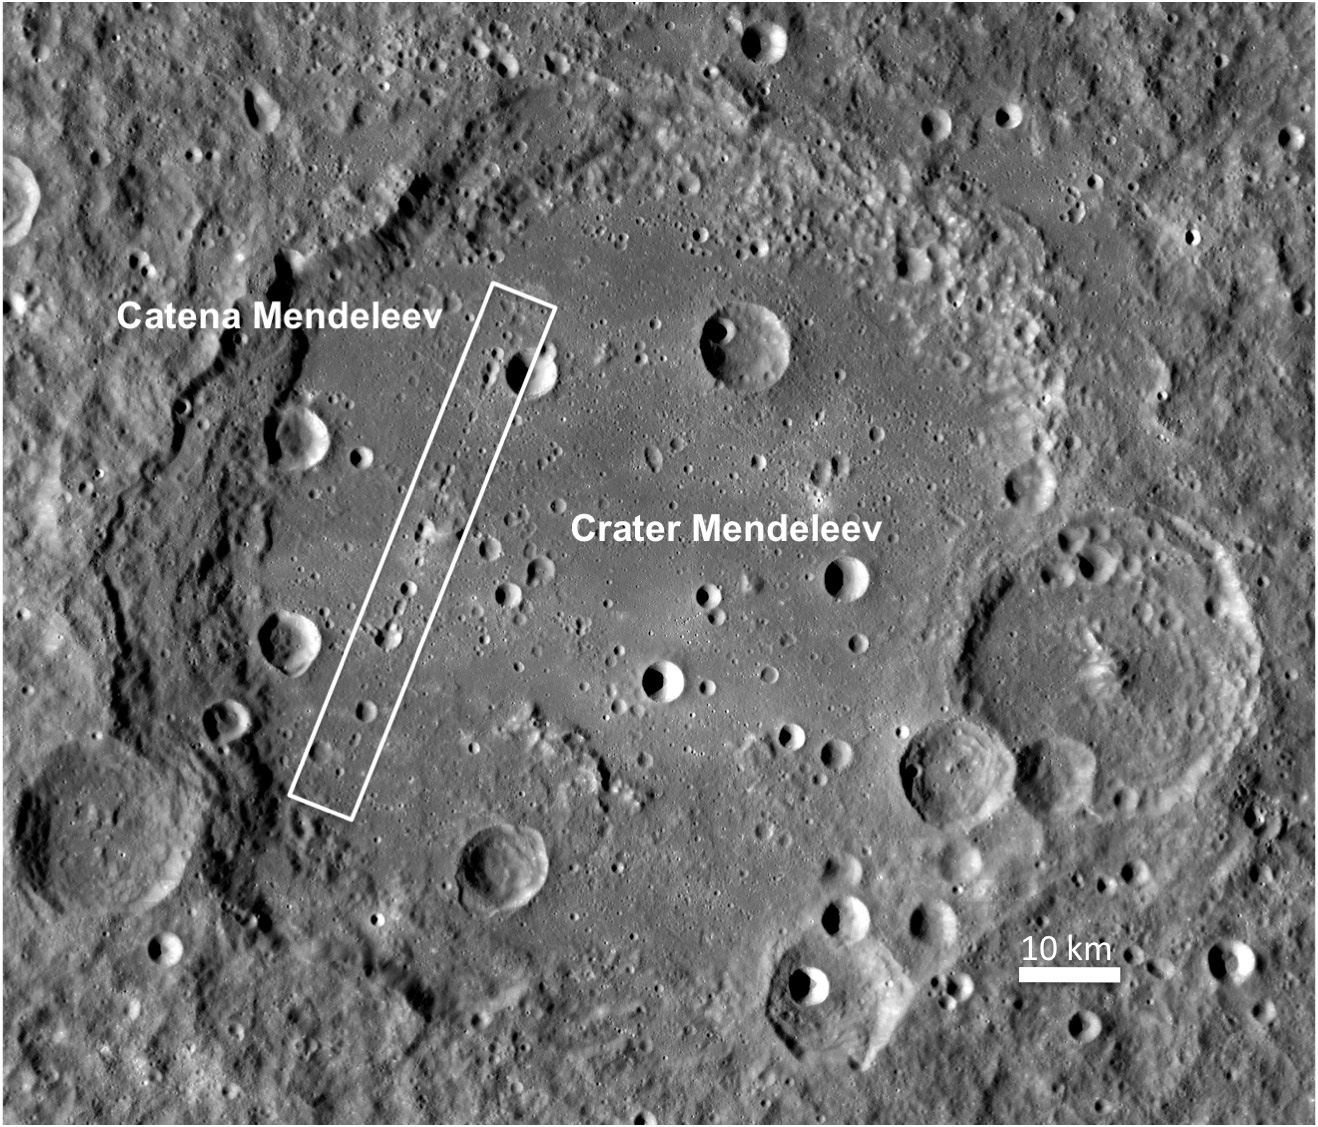 Crater impact filled with craters of impact on the moon.